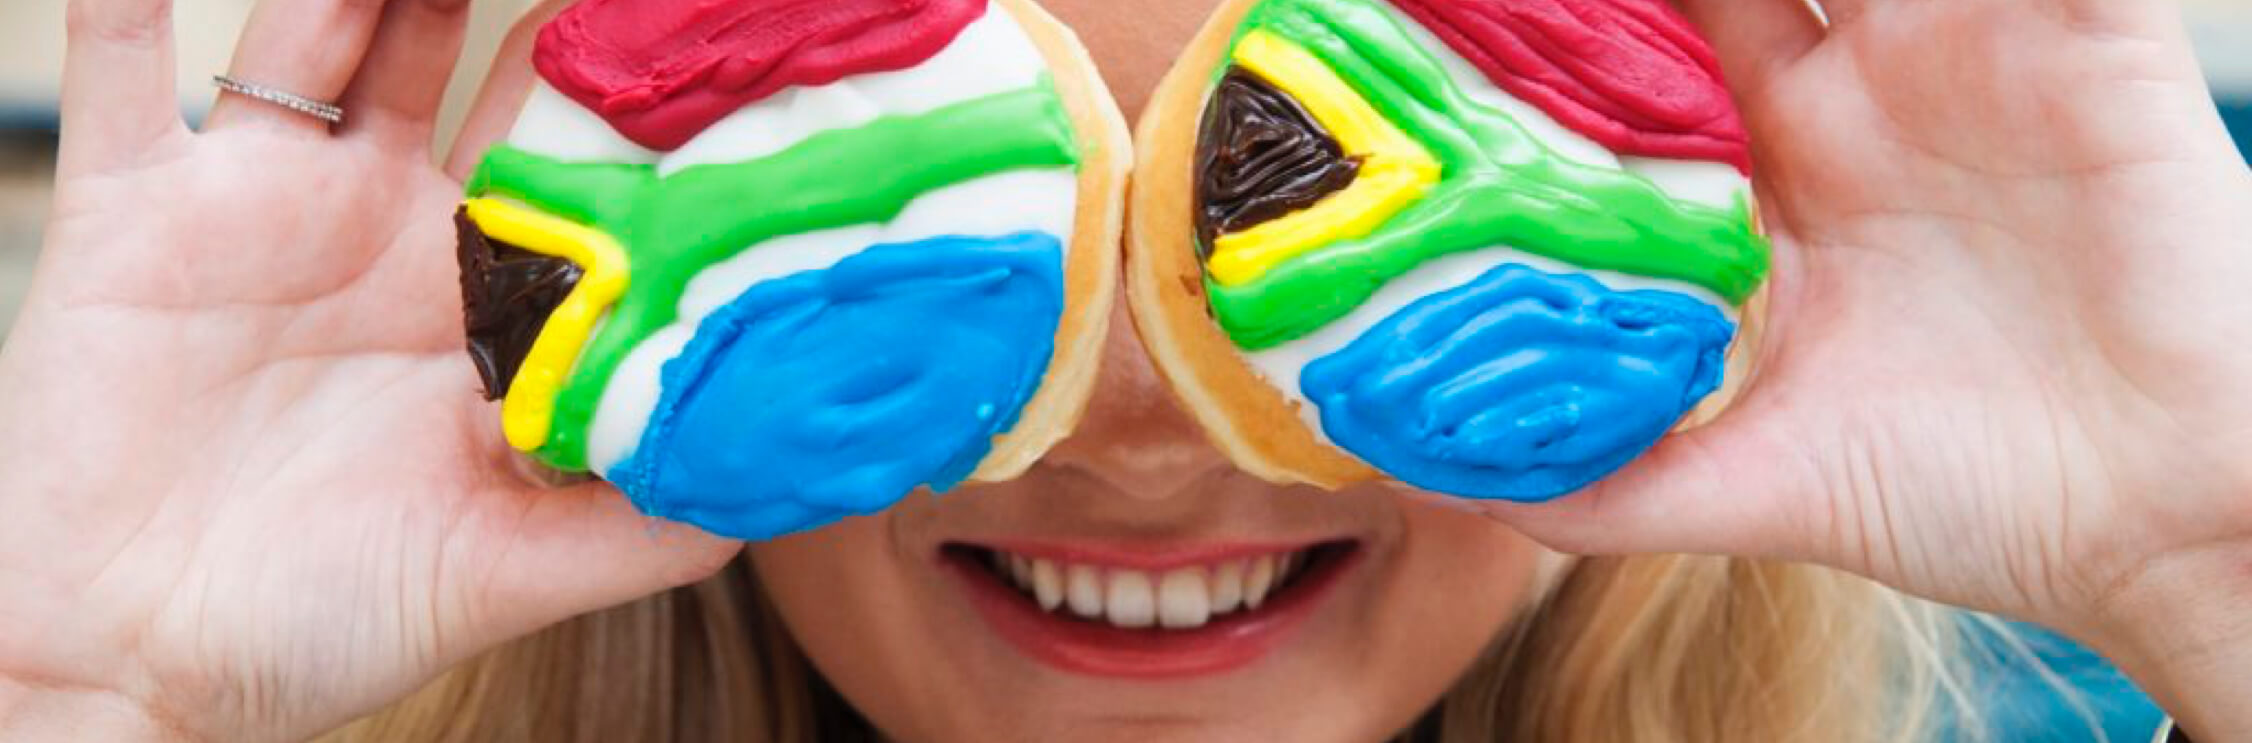 Close up of young woman with blonde hair holding up to her eyes two sponge cakes decorated with the South African flag in icing.